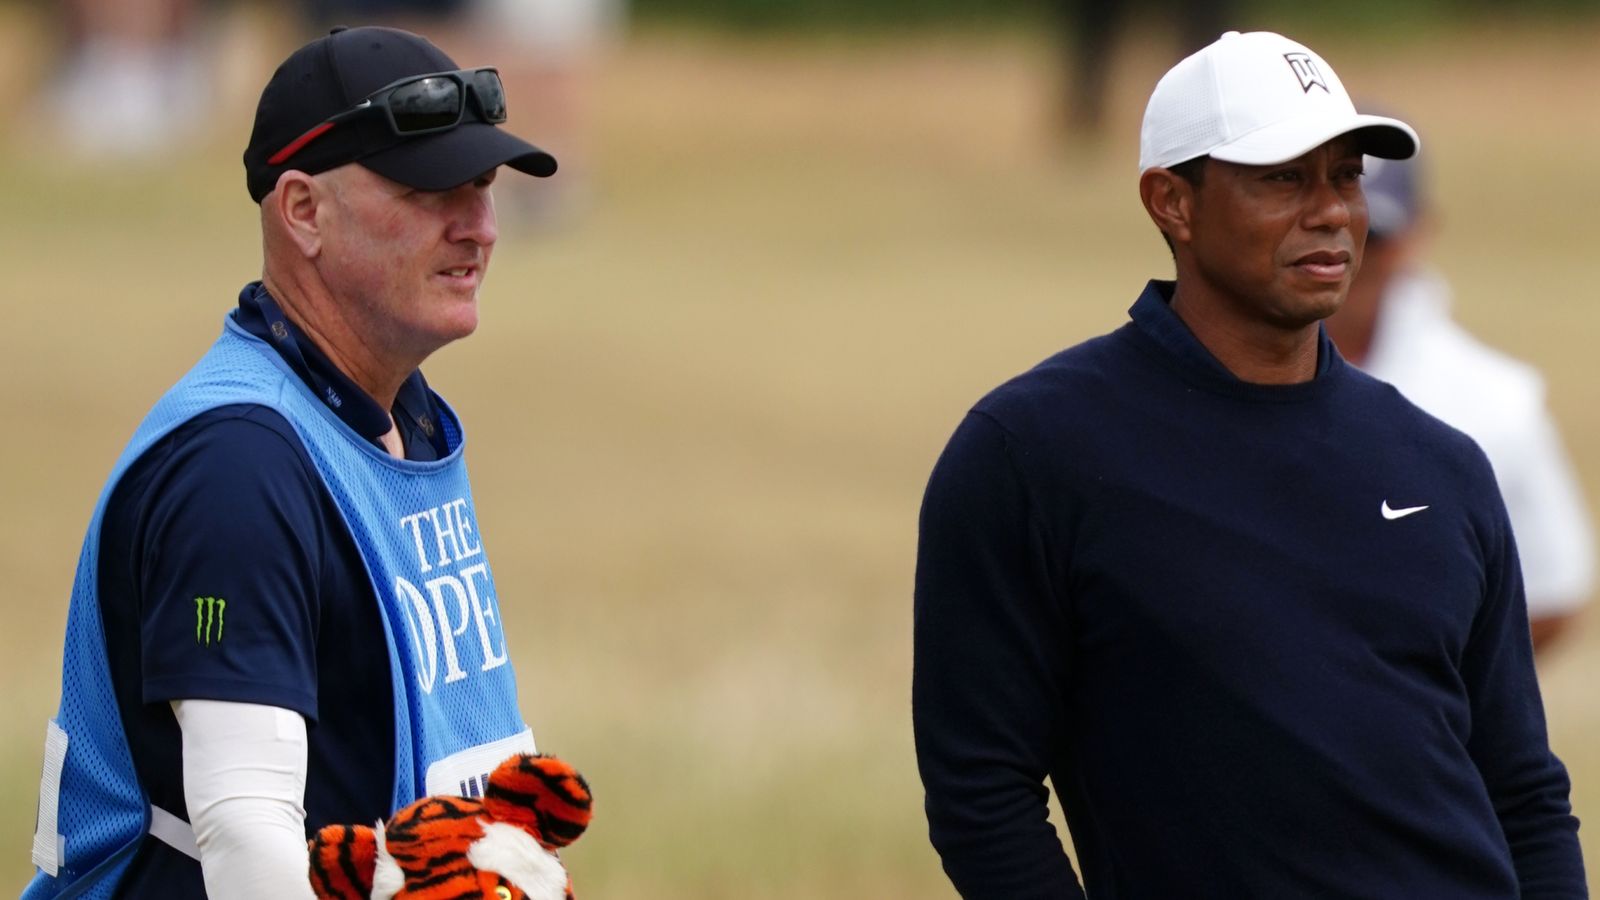 The 150th Open: Tiger Woods denies retirement rumours ahead of major return at St Andrews